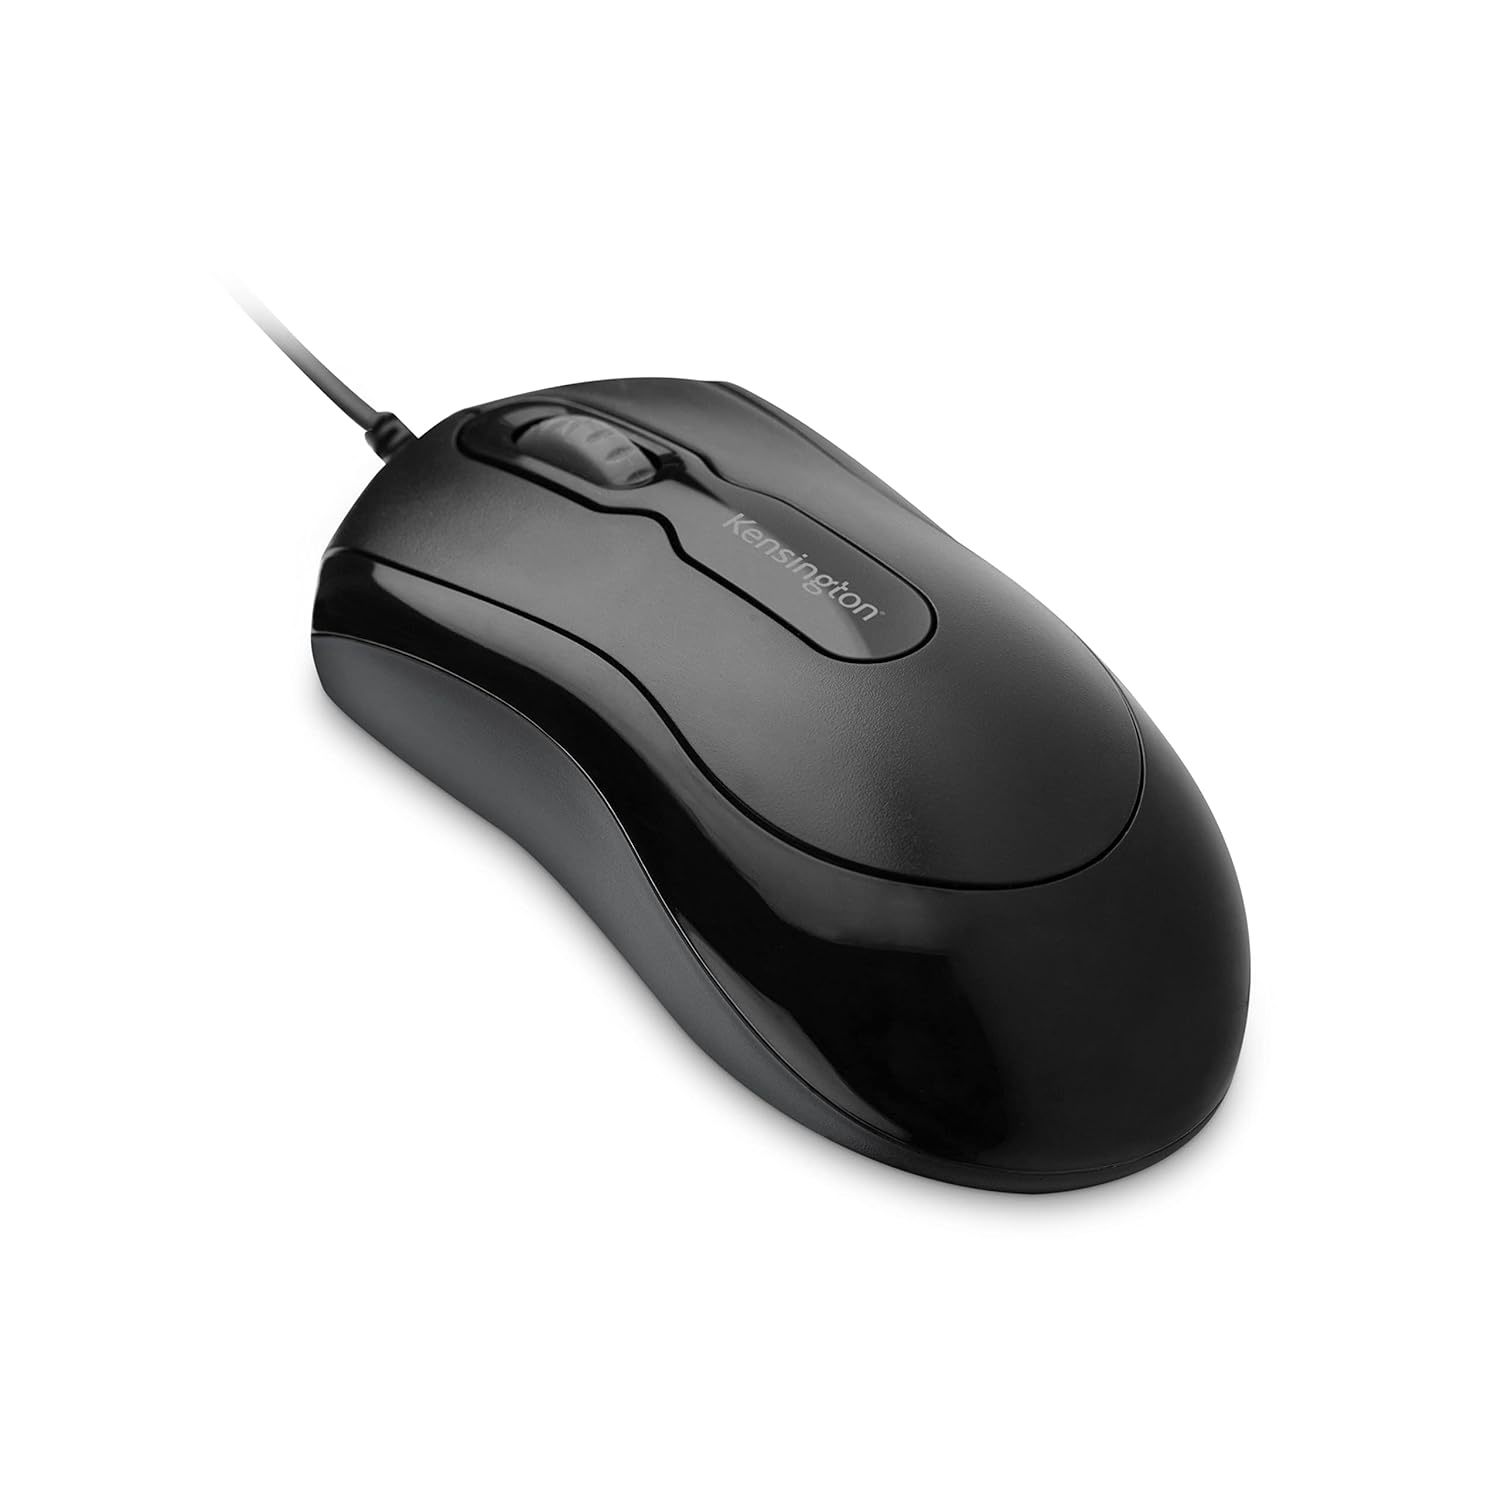 Kensington Mouse-in-a-Box Wired USB Mouse (K72356US),Black - $14.99